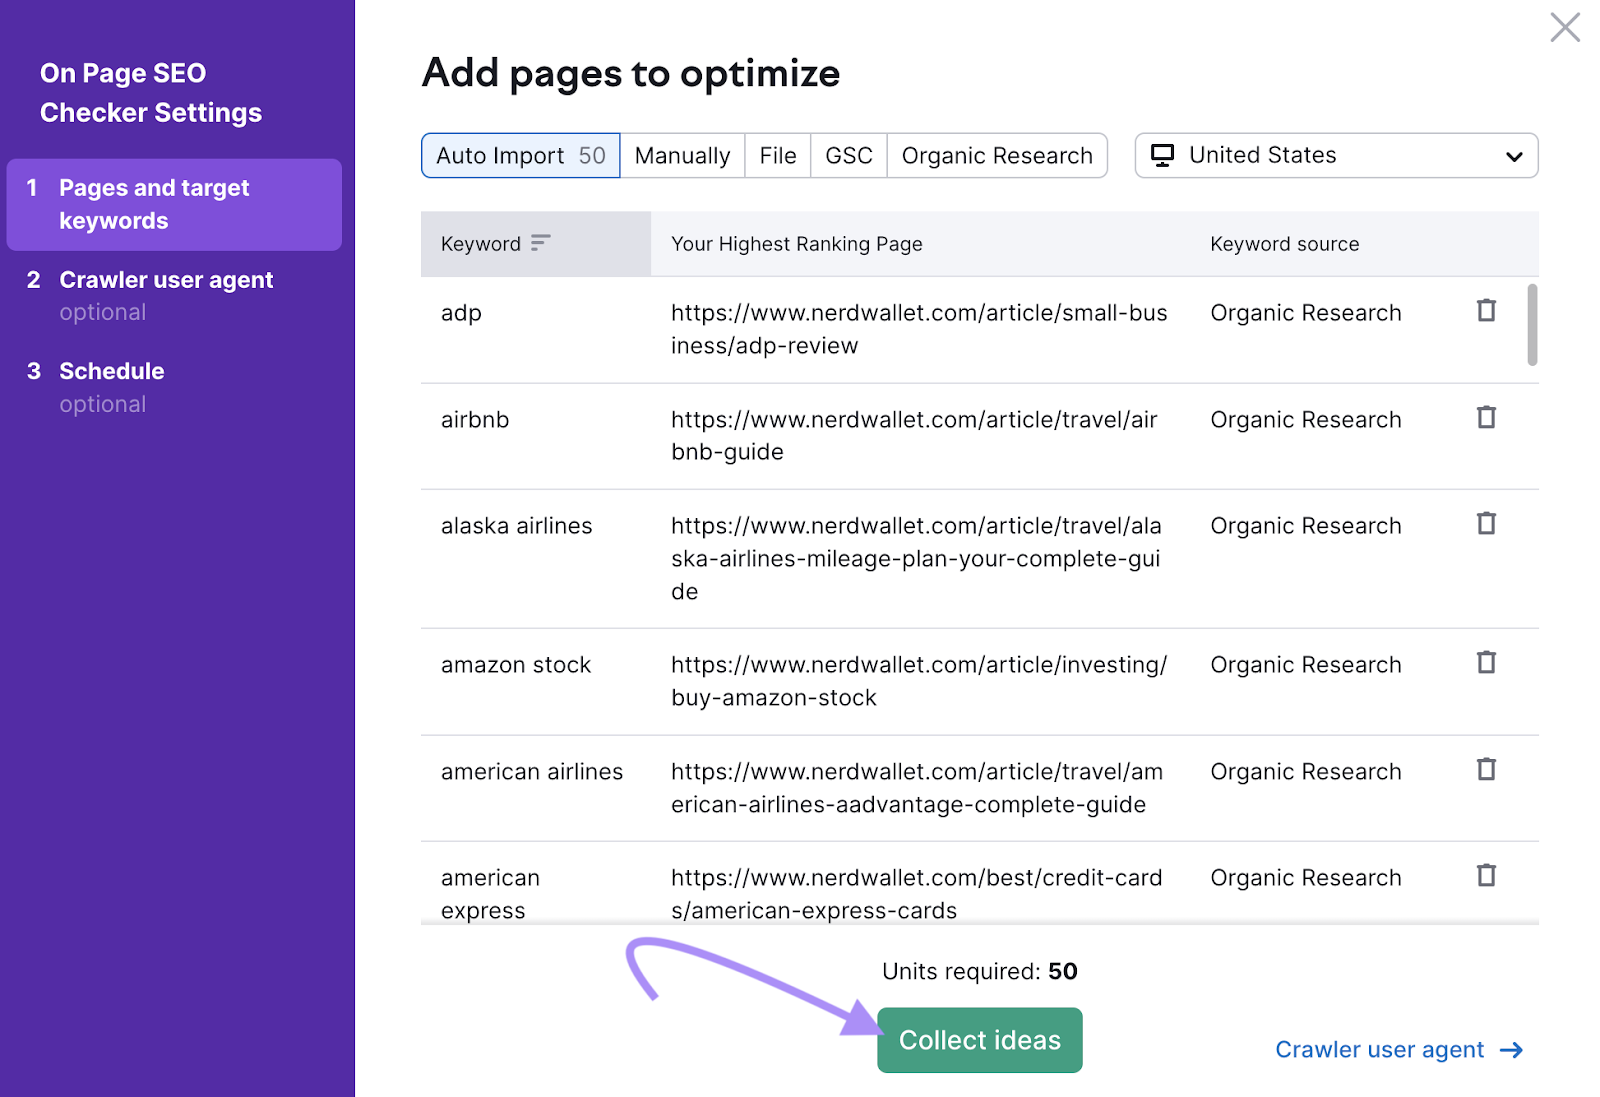 "Add pages to optimize" window